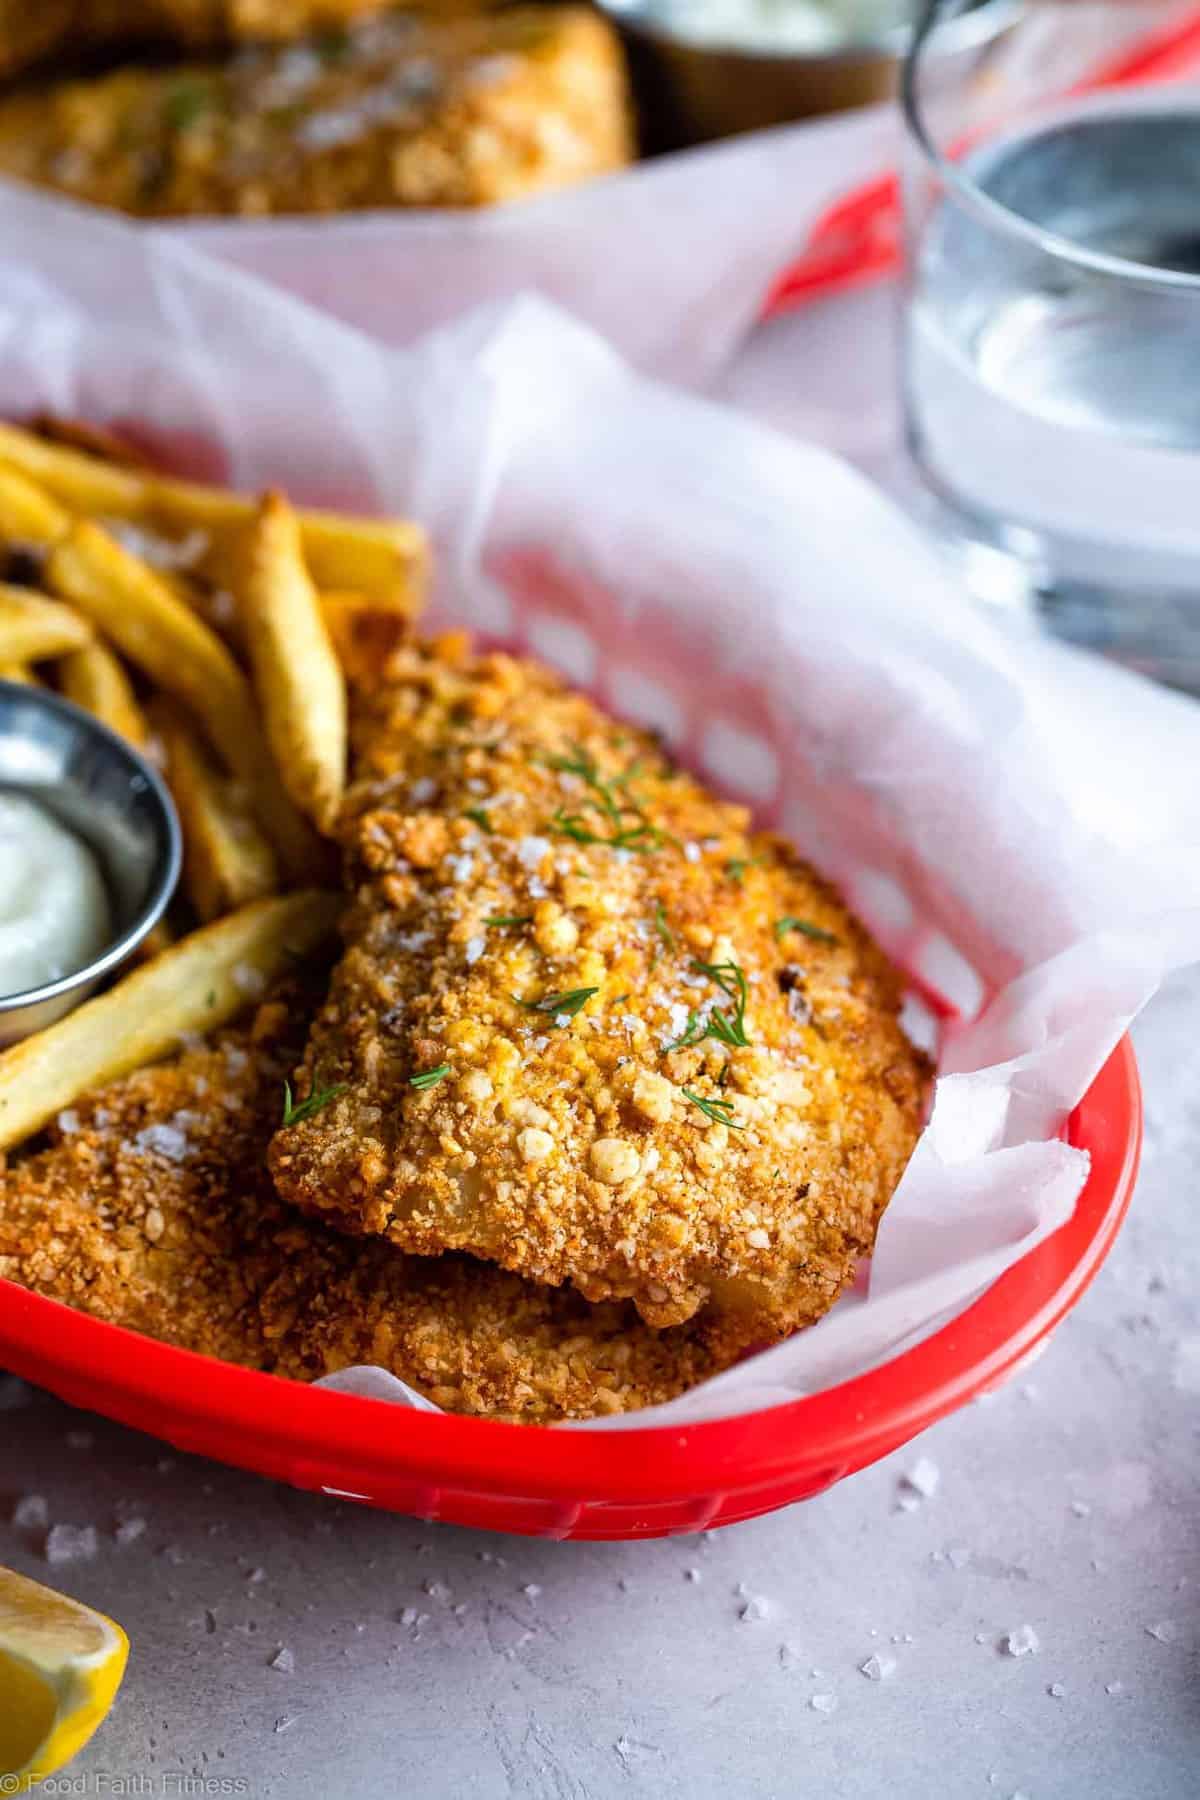 Crispy Air Fried Fish -  This airfryer battered fish is SO easy to make and you will never believe it's oil free! Serve it with a healthy Greek yogurt tartar sauce for a dinner that is only 200 calories, 2 Freestyle points and protein packed! | #Foodfaithfitness |  